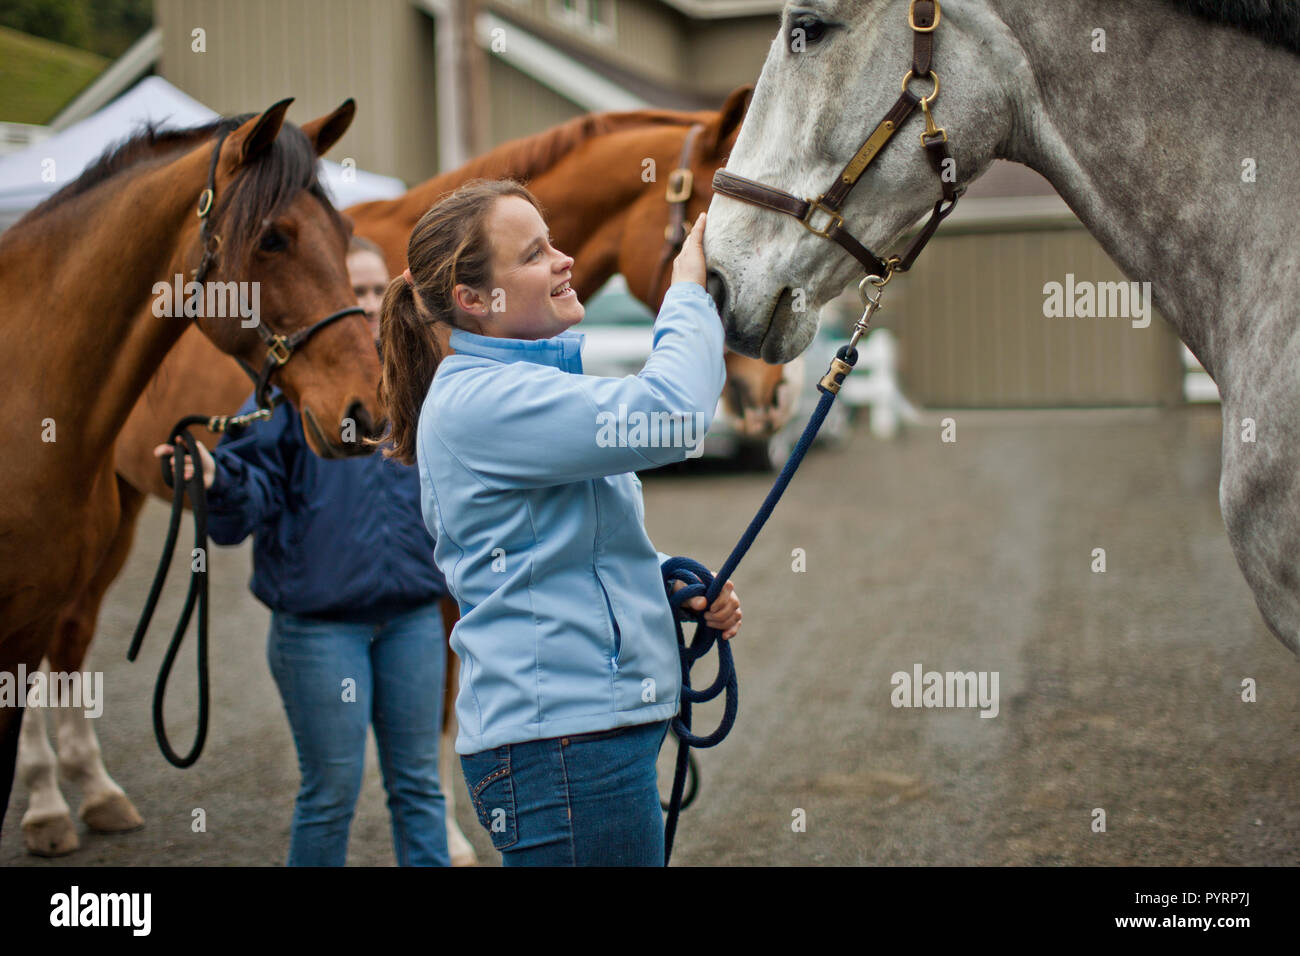 Smiling young woman affectionately petting her horse on the nose. Stock Photo